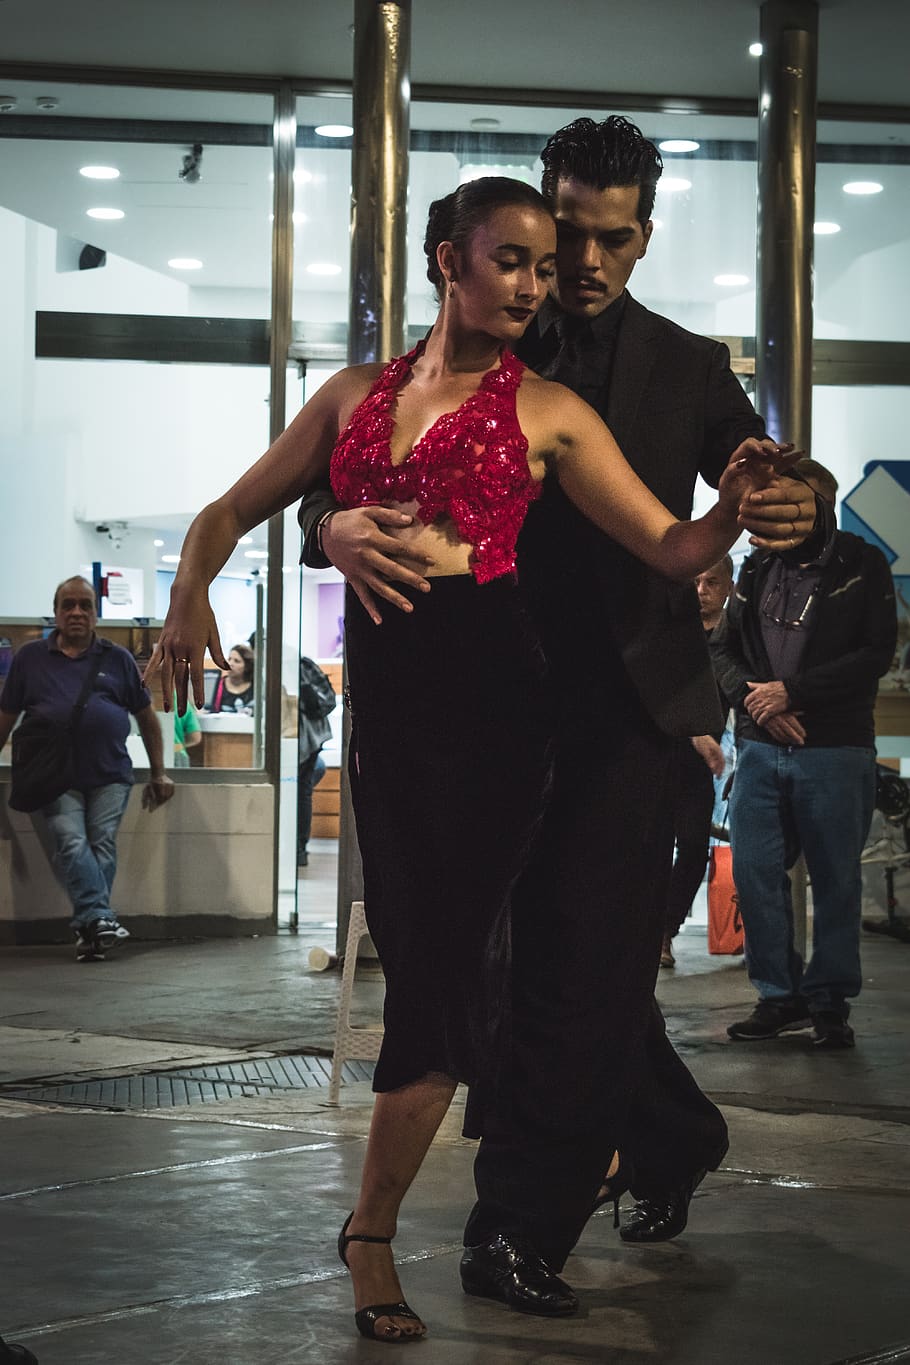 tango, dancing, couple, argentina, black and white, group of people, women, real people, full length, young adult